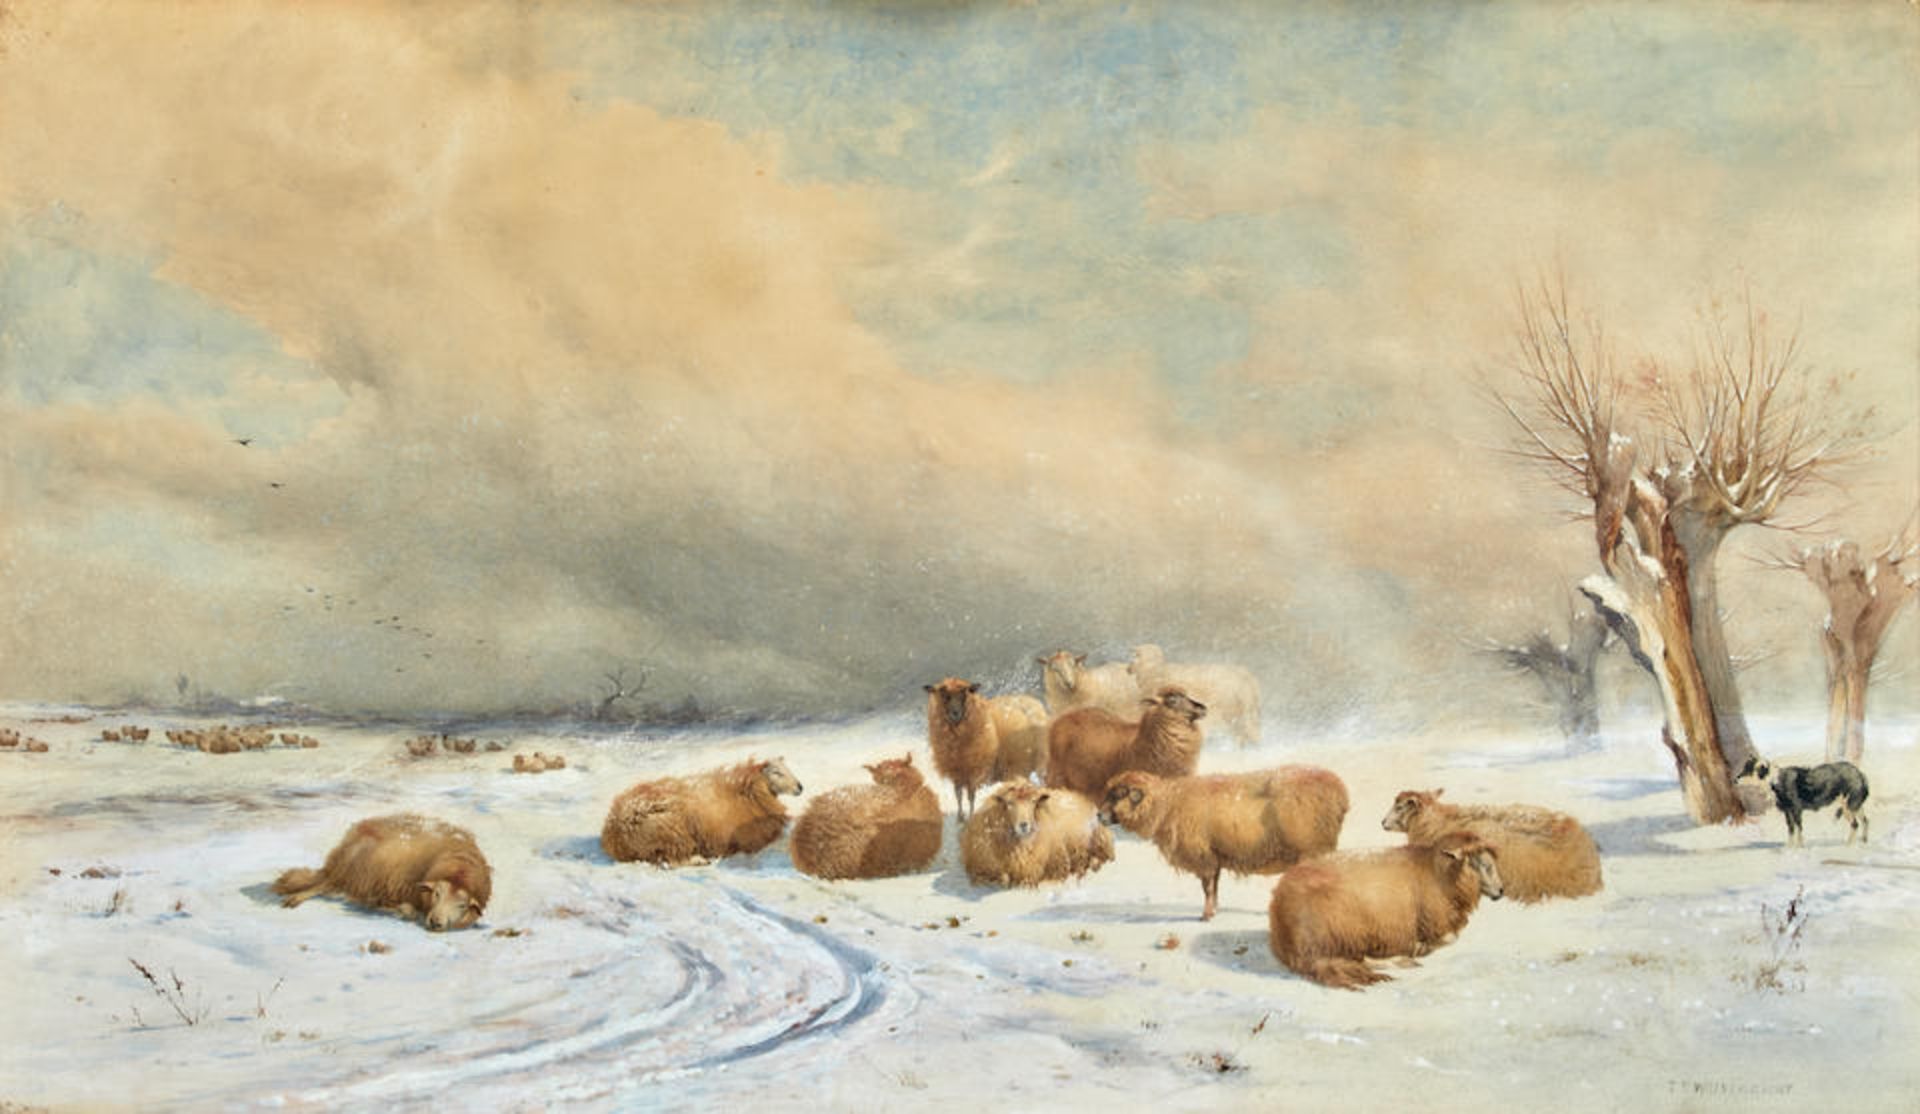 THOMAS FRANCIS WAINEWRIGHT (British, 1794-1883) Keeping Watch Over the Flock in Winter (framed 1...